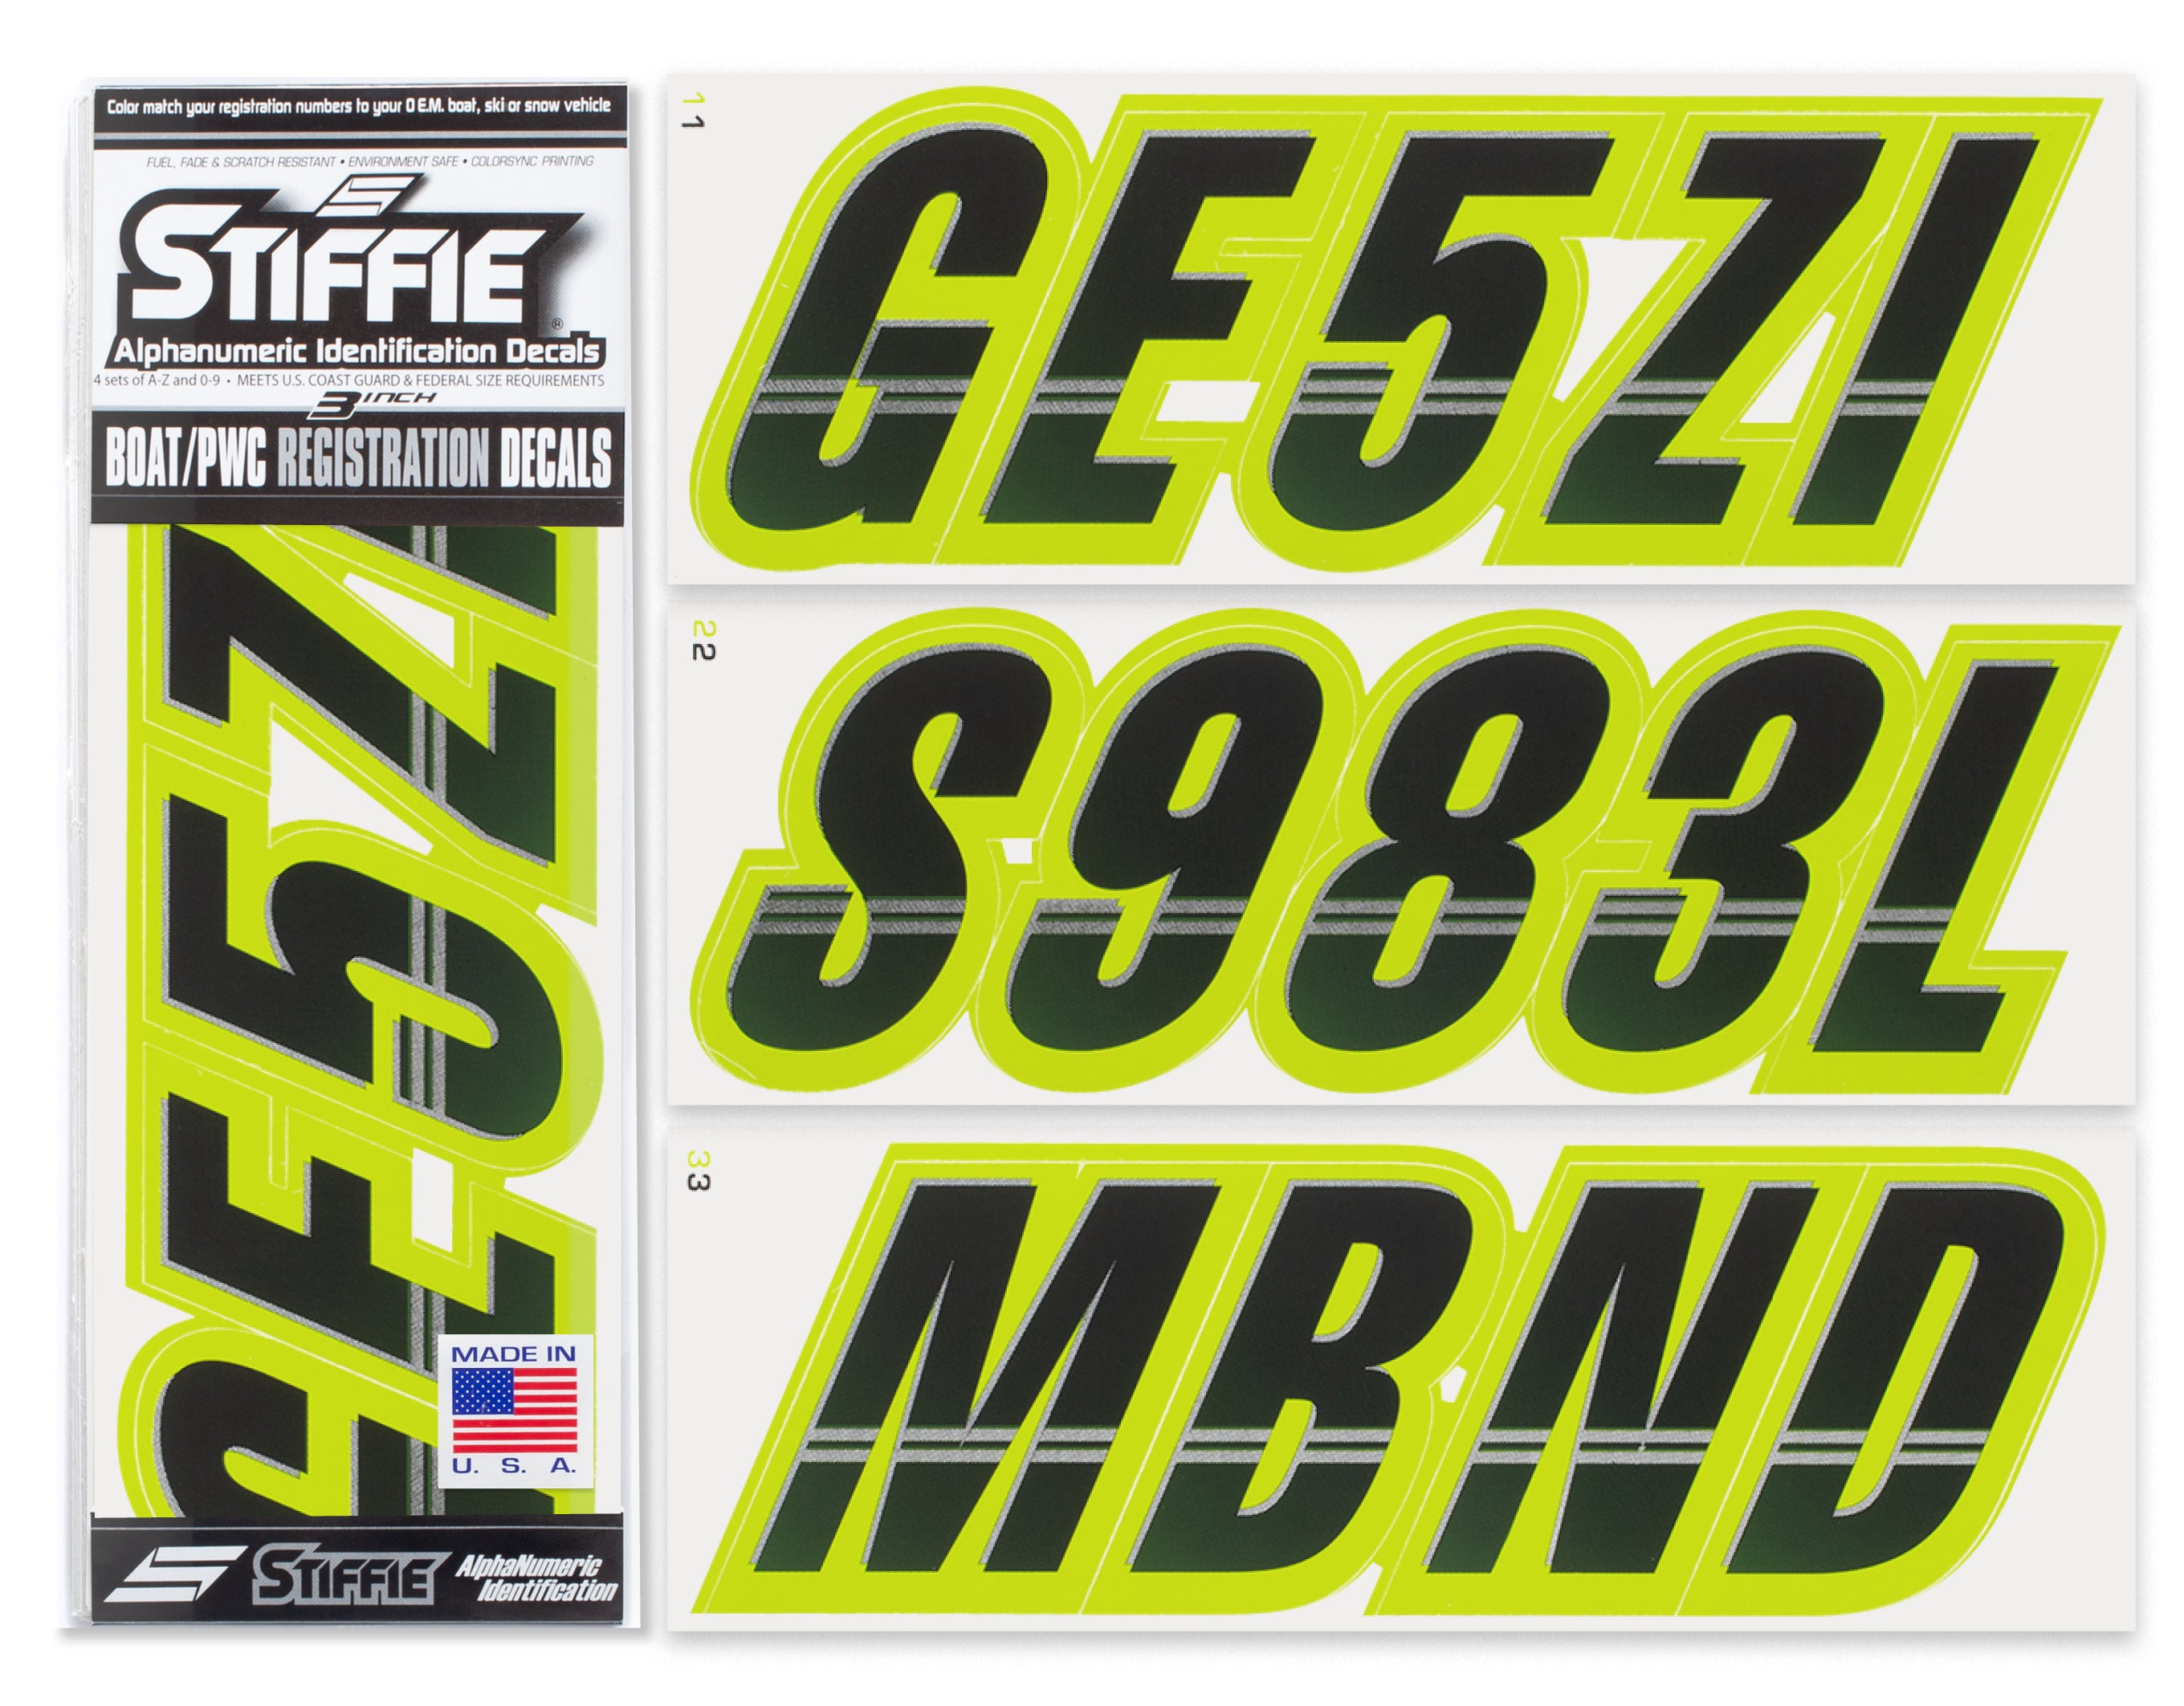 STIFFIE Techtron Black/Electric Lime 3" Alpha-Numeric Registration Identification Numbers Stickers Decals for Boats & Personal Watercraft